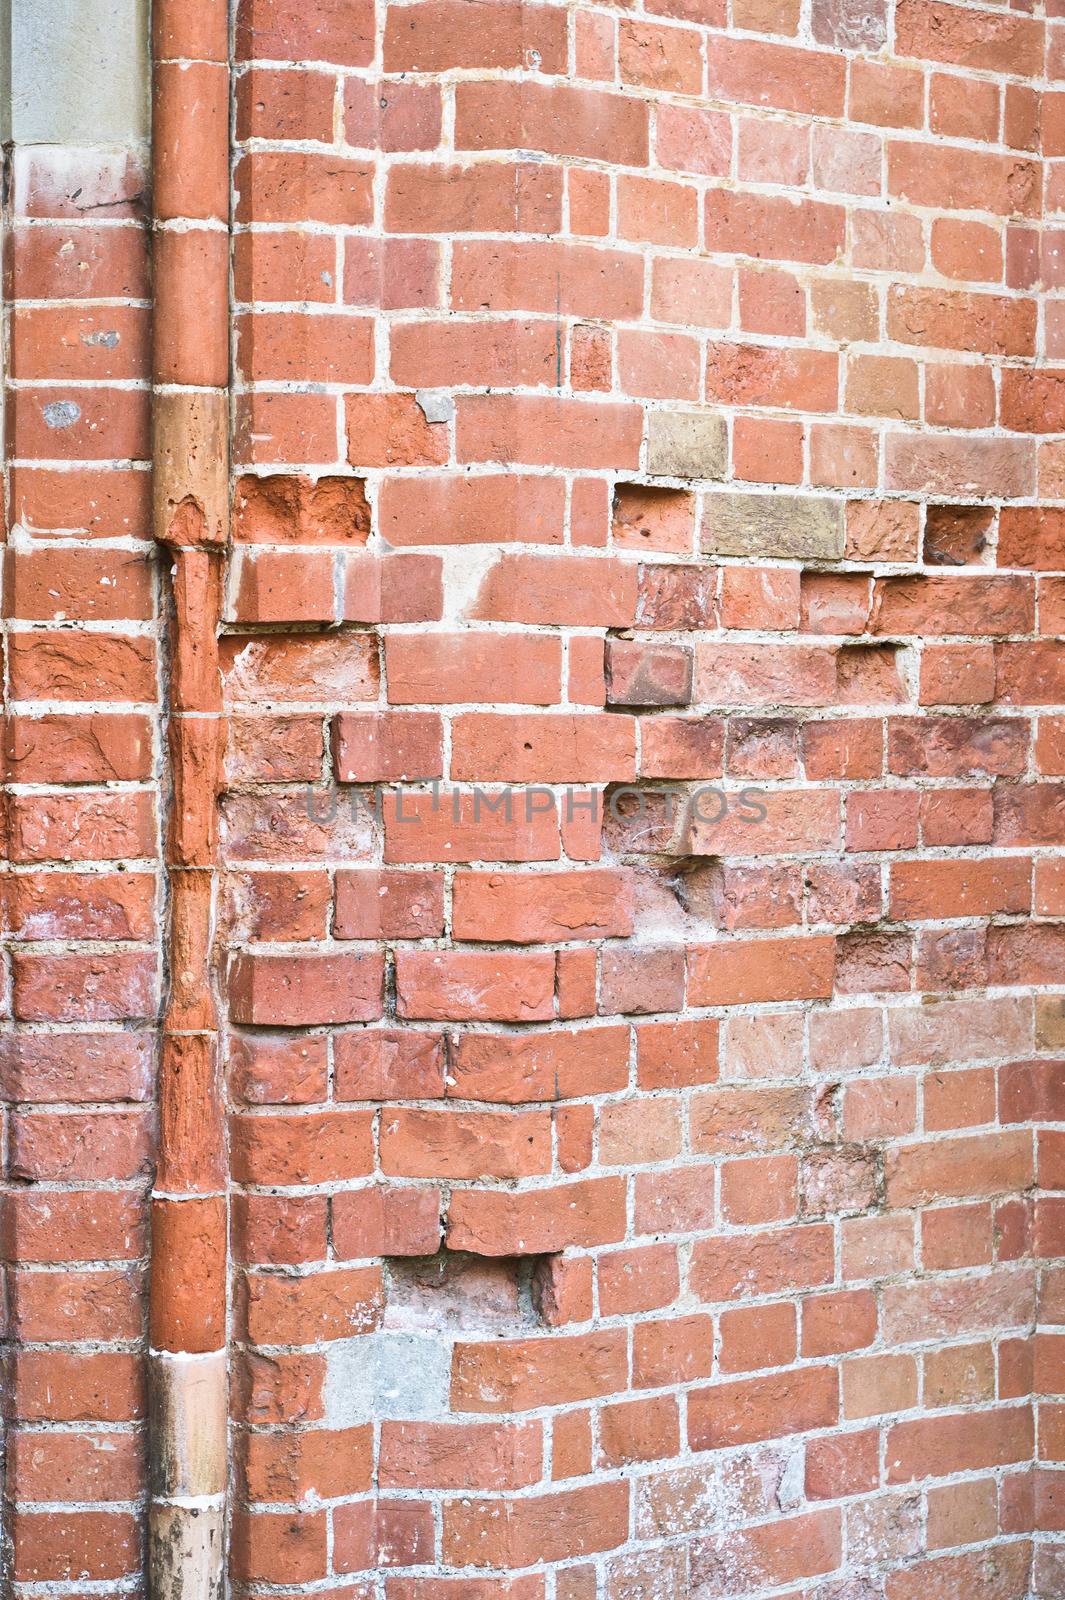 A delapidated brick wall